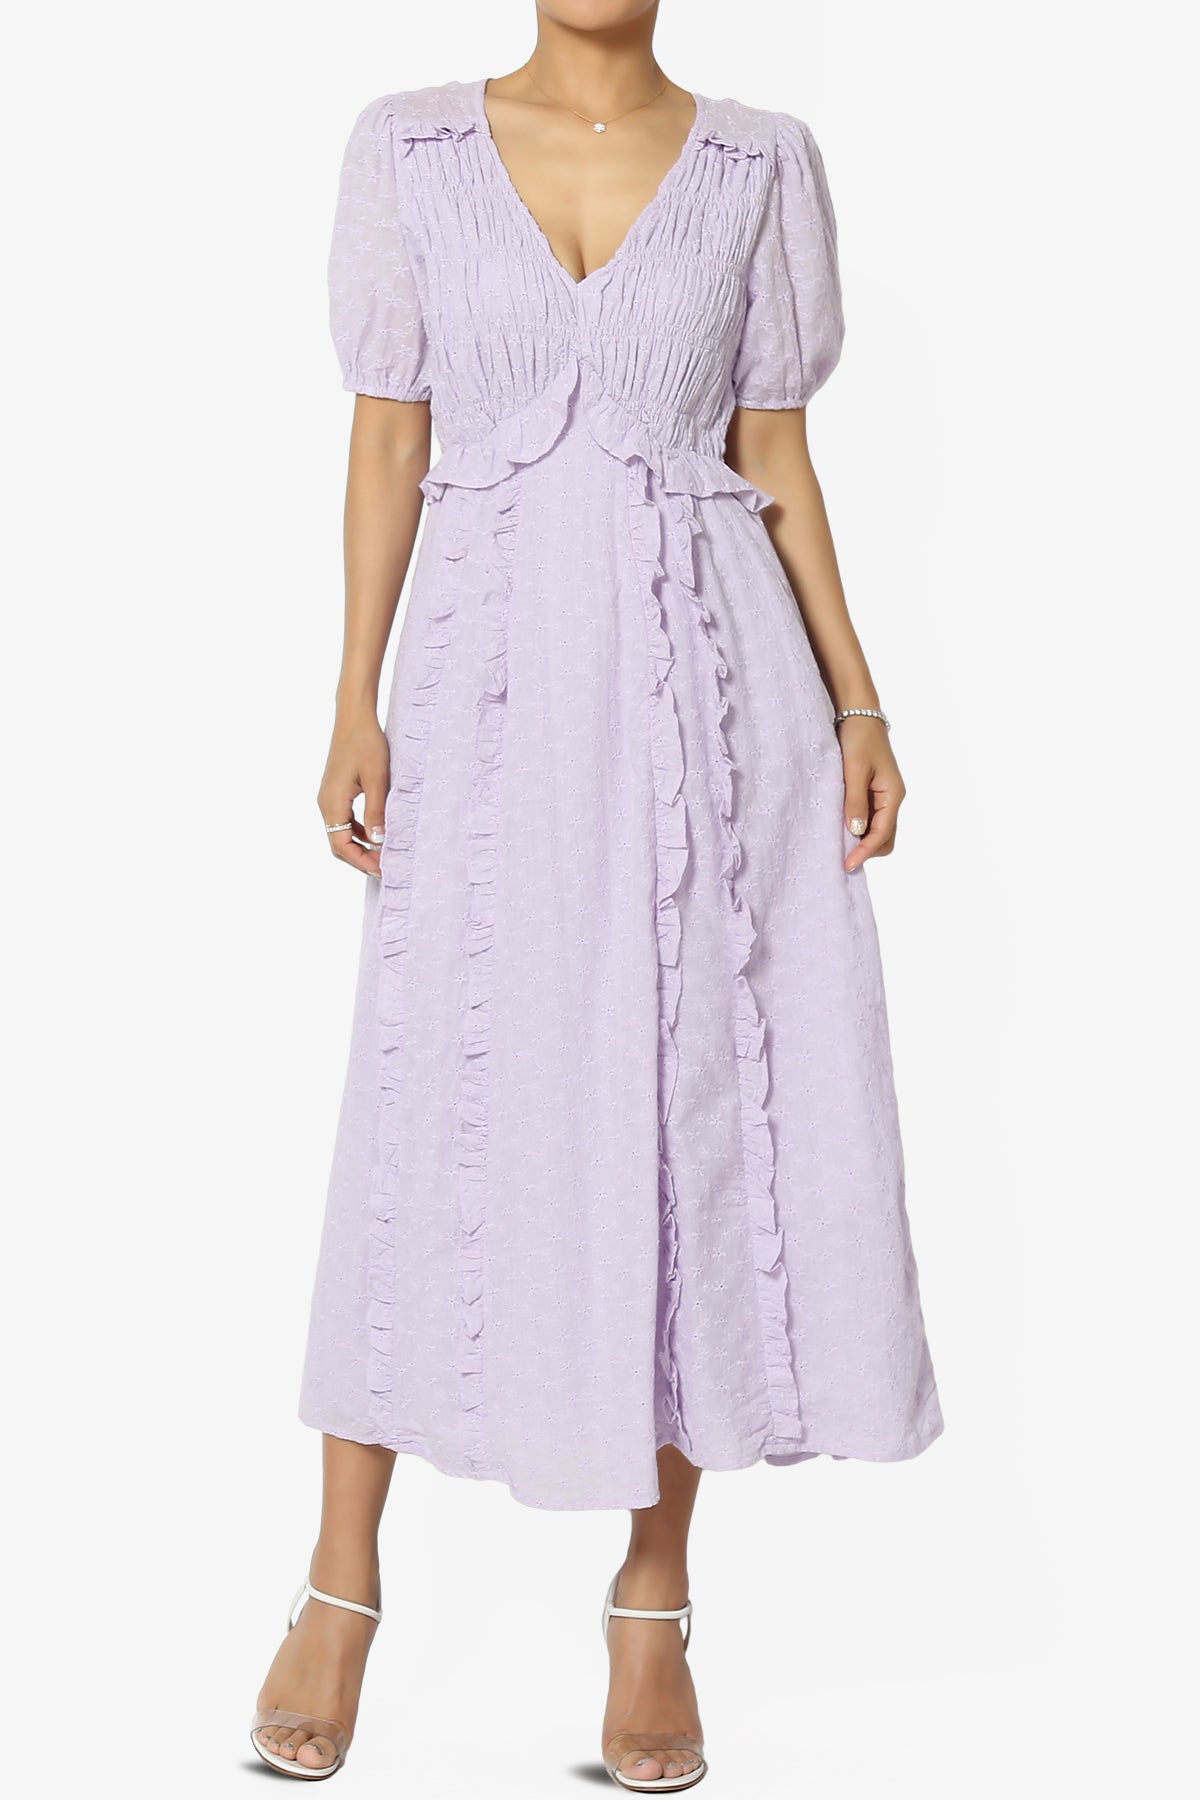 Rena Embroidered Eyelet Ruffle Midi Dress in Lavender